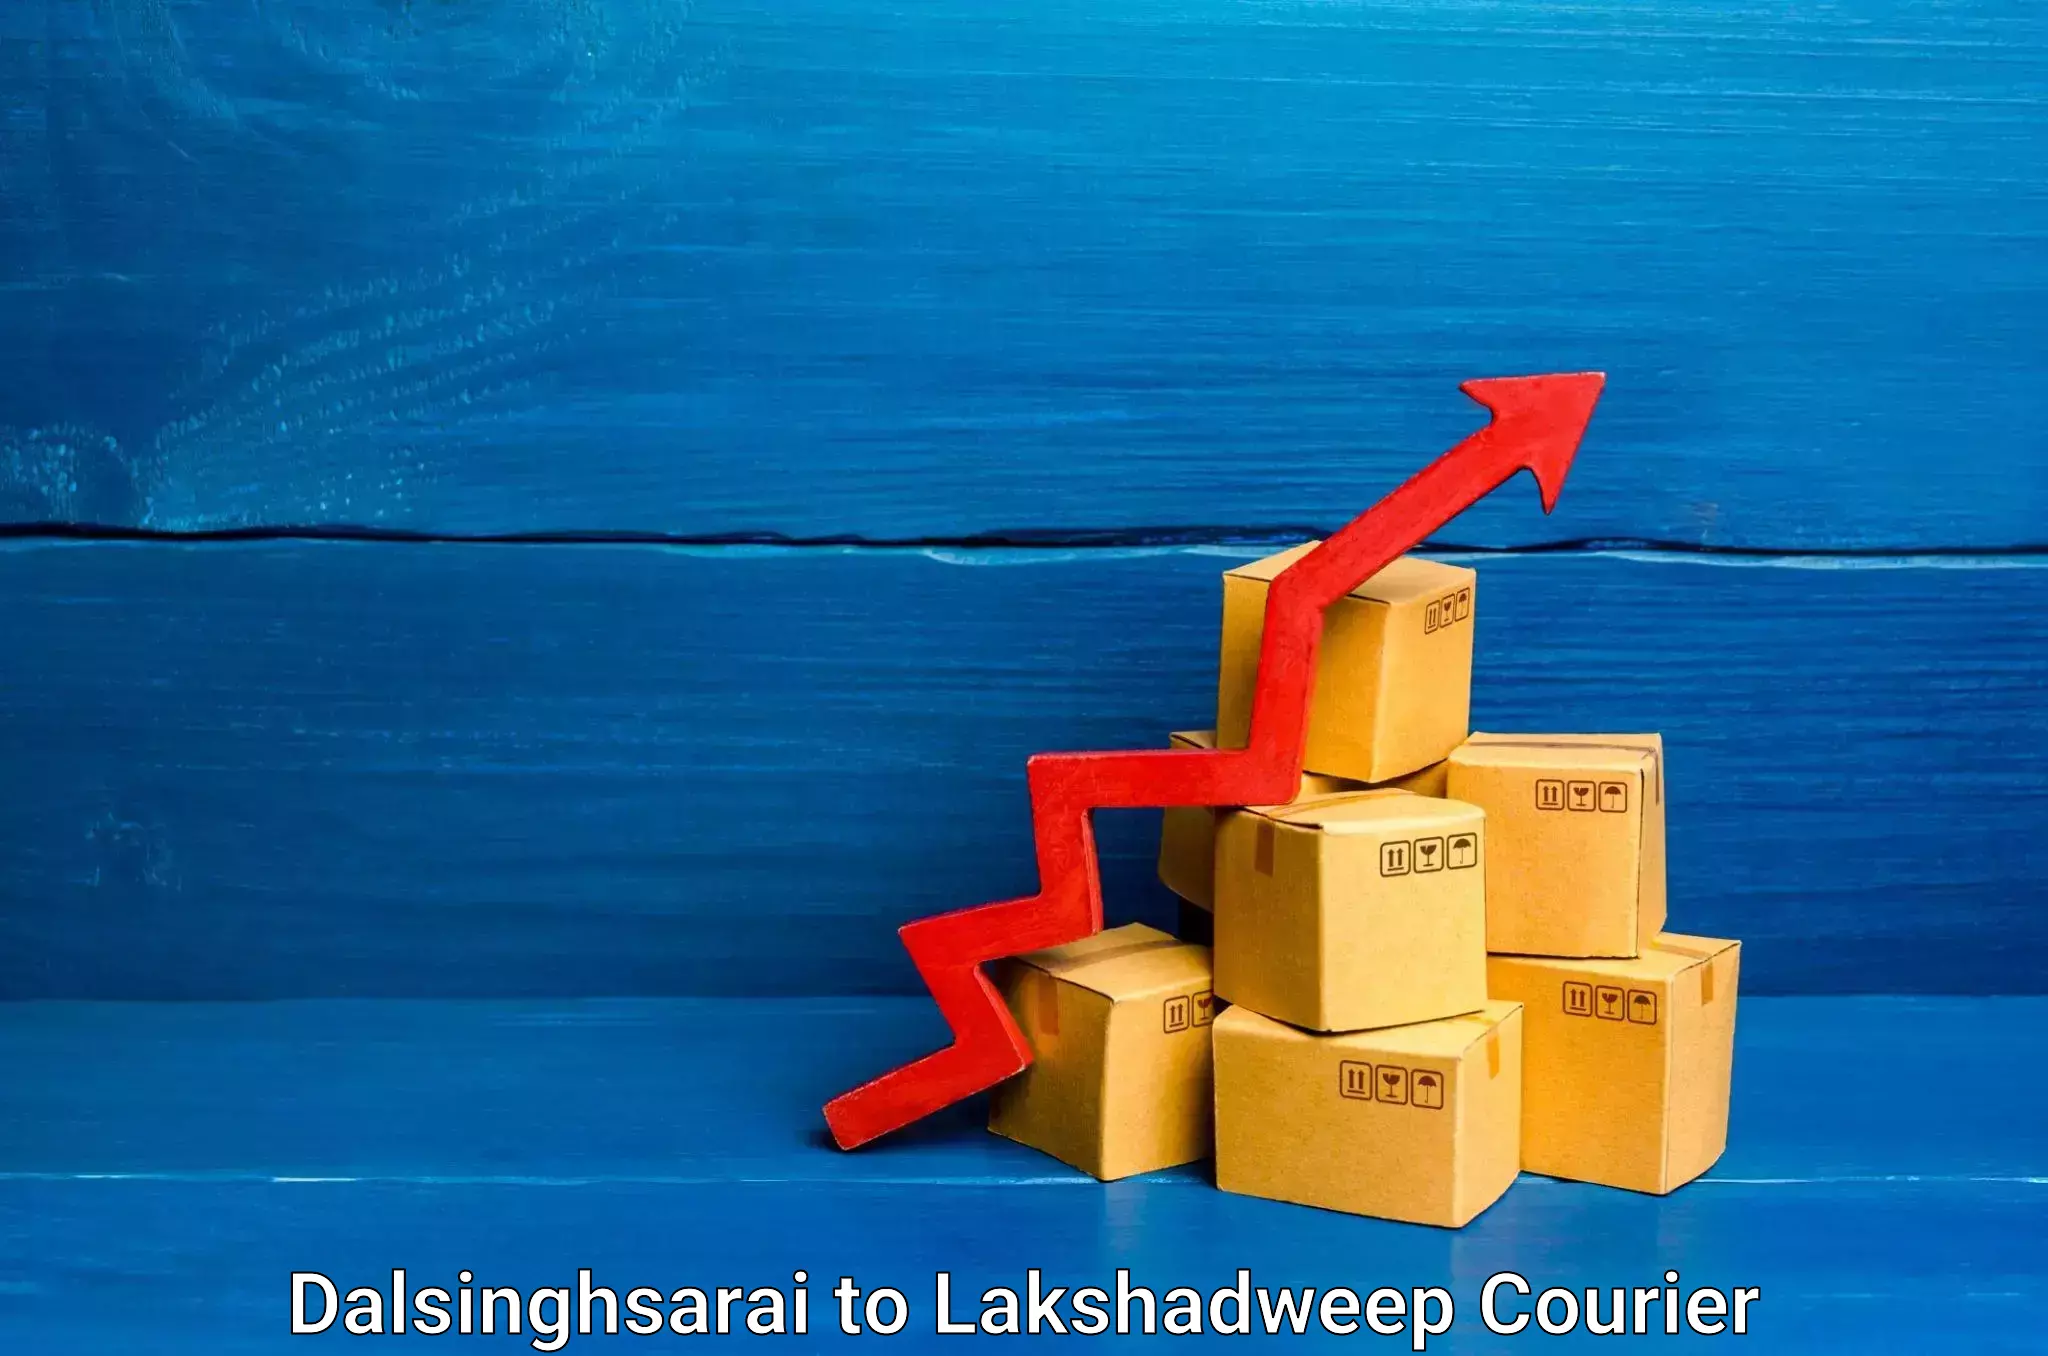 Home goods movers Dalsinghsarai to Lakshadweep